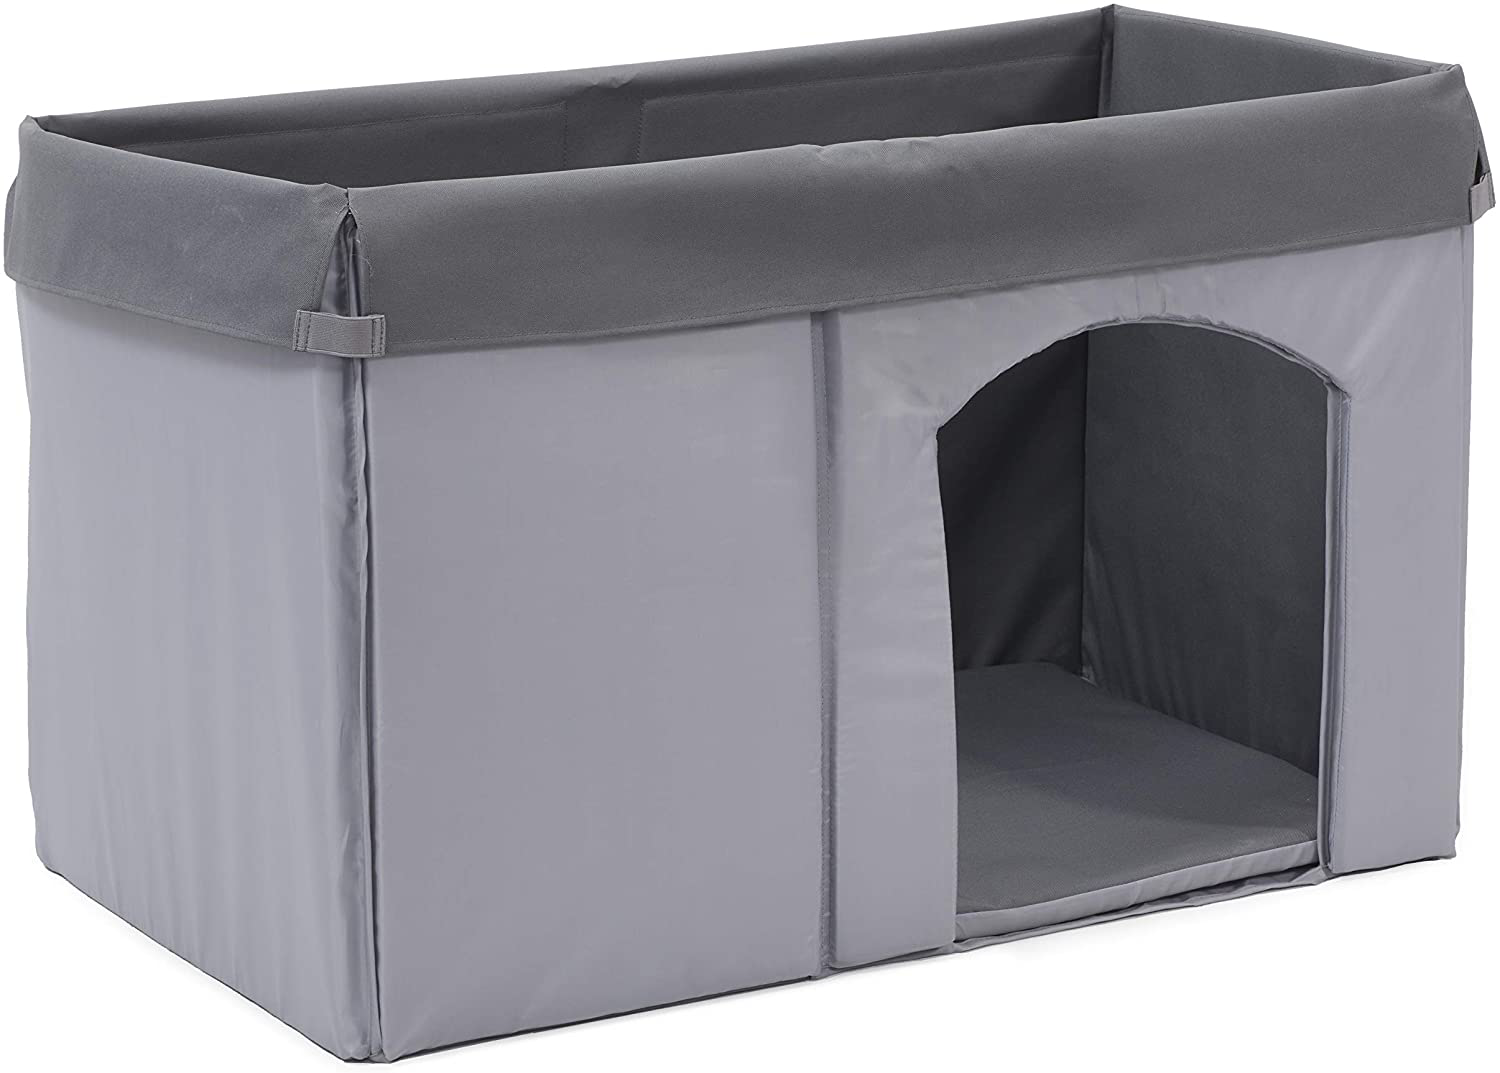 Midwest Homes for Pets Eilio Dog House Insulation Kit, Fits Medium Dog House Measuring 25.24L X 40.60W X 29.10H - Inches, 1-Year Manufacturer'S Warranty